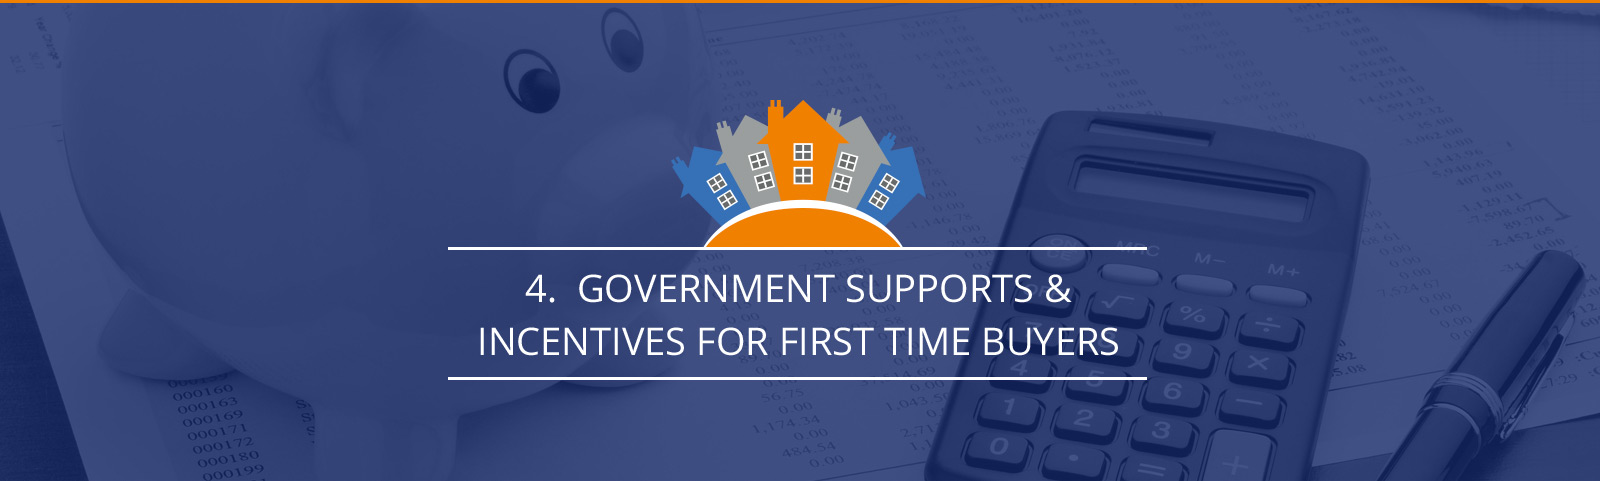 Government supports & incentives for first time buyers